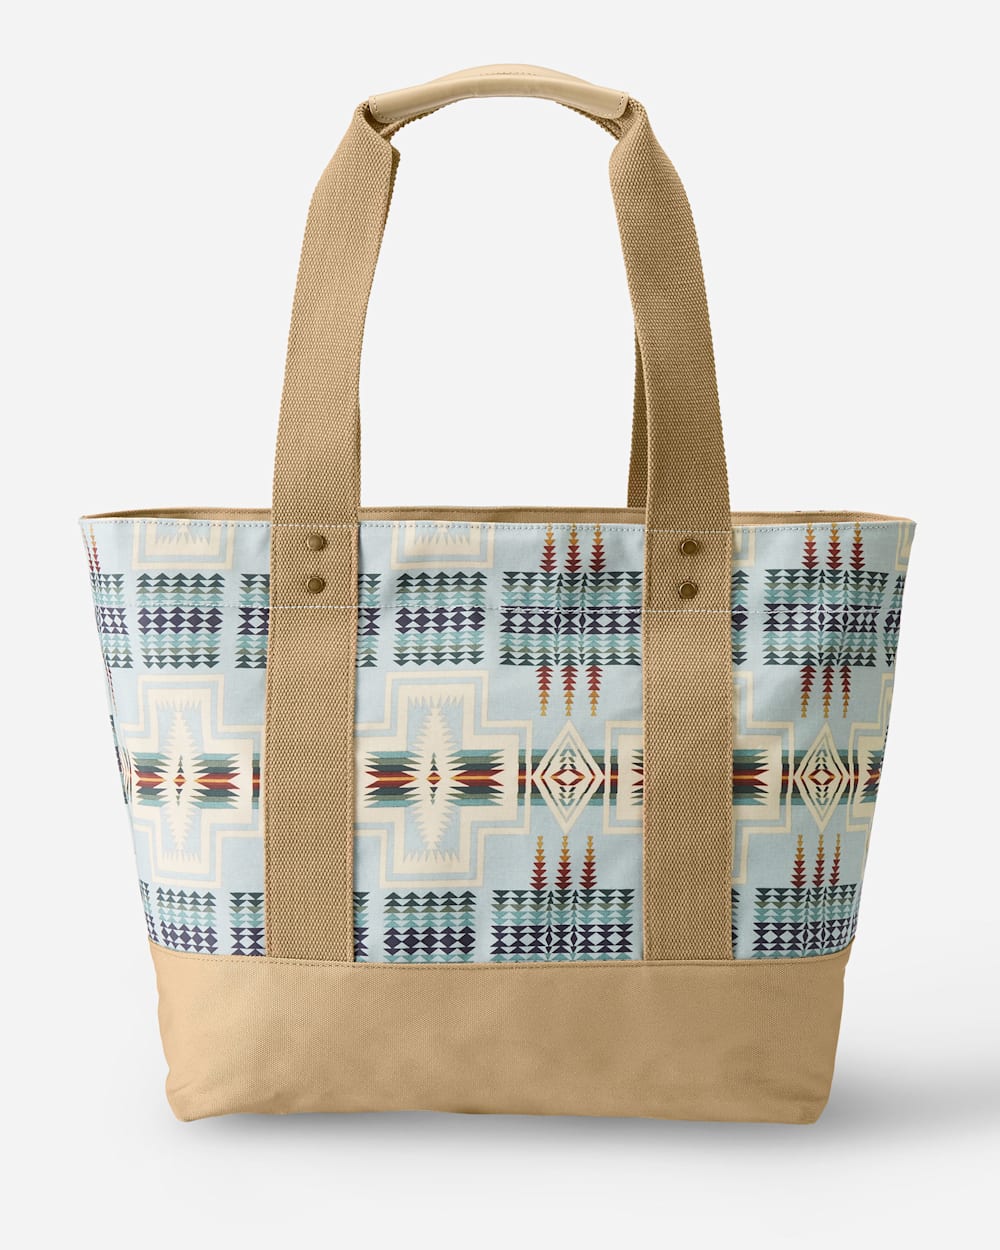 ALTERNATE VIEW OF HARDING CANOPY CANVAS TOTE IN AQUA image number 2